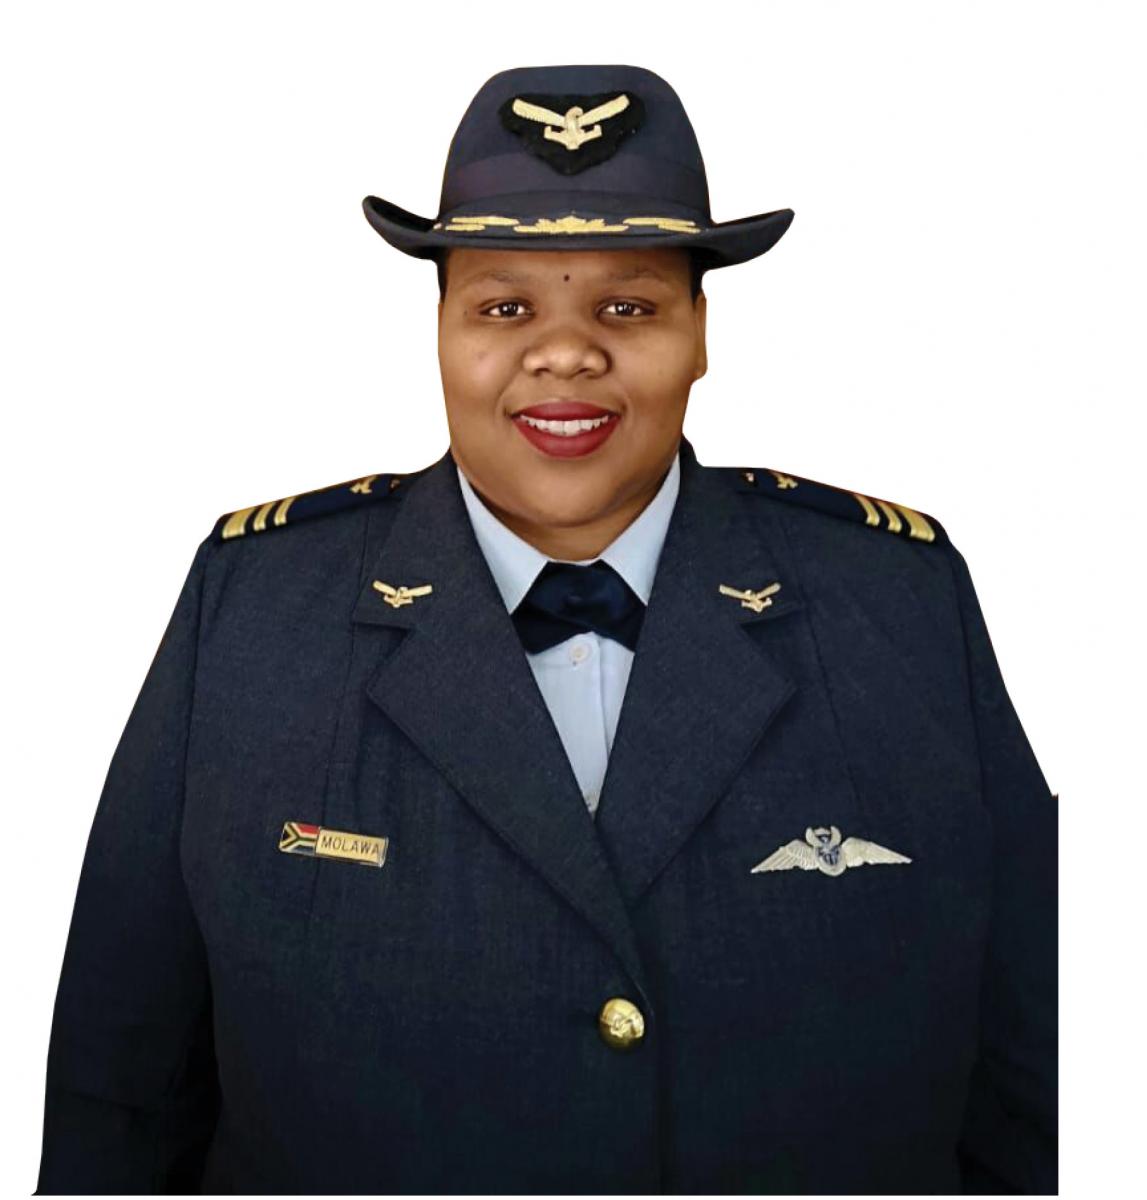 Lt Col Molawa is the first black person to command a South African Air Force (SAAF) installation.